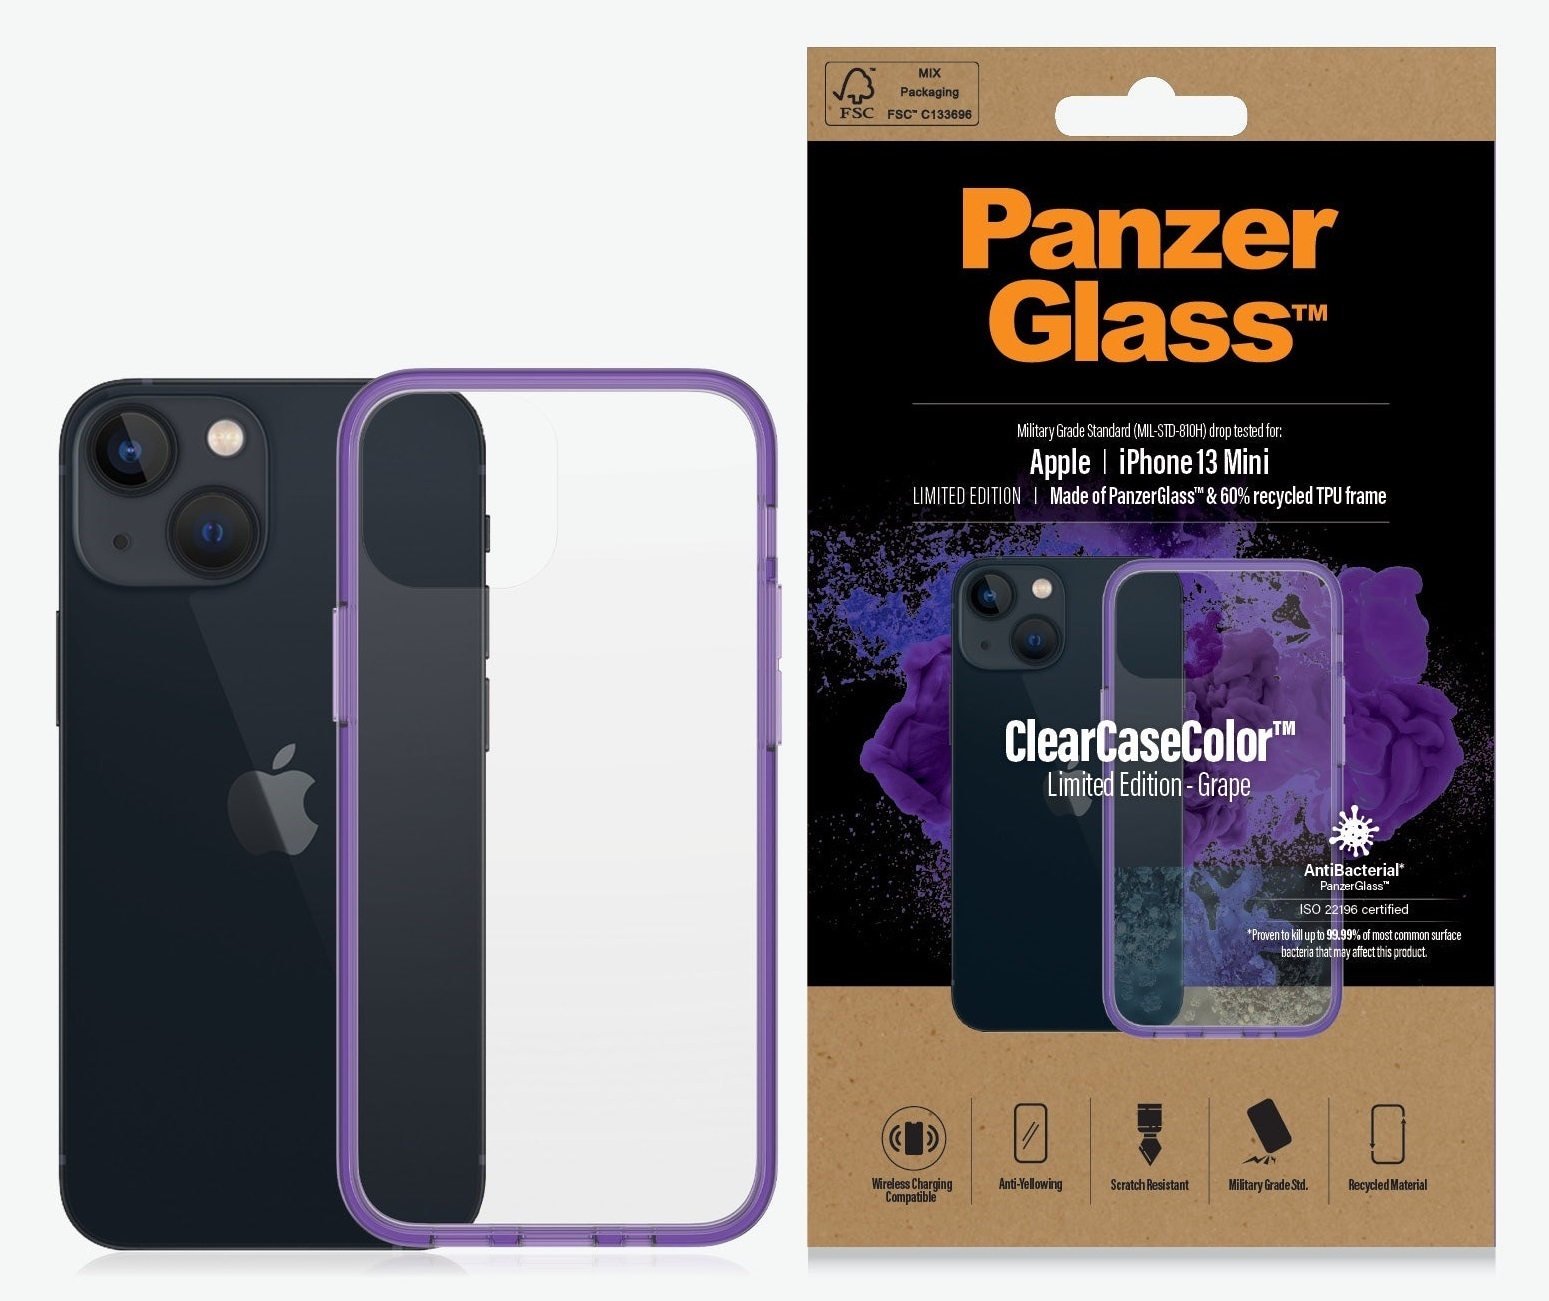 PanzerGlass Apple iPhone 13 Mini ClearCase - Grape Limited Edition (0327), AntiBacterial, Military Grade Standard, Scratch Resistant, Anti-Yellowing